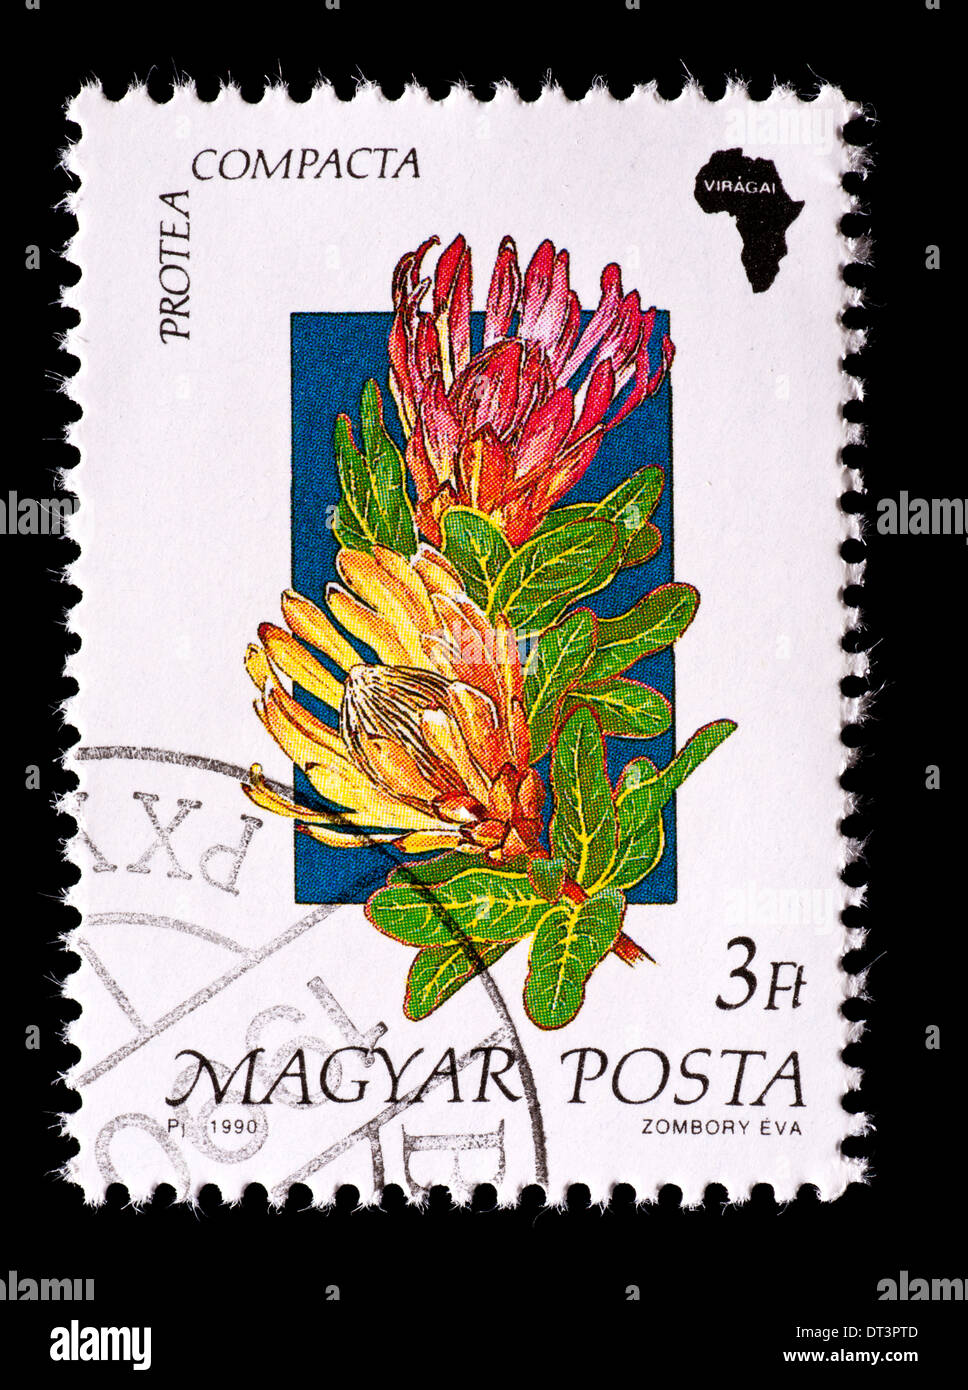 Postage stamp from Hungary depicting an African wildflower (Protea compacta) Stock Photo